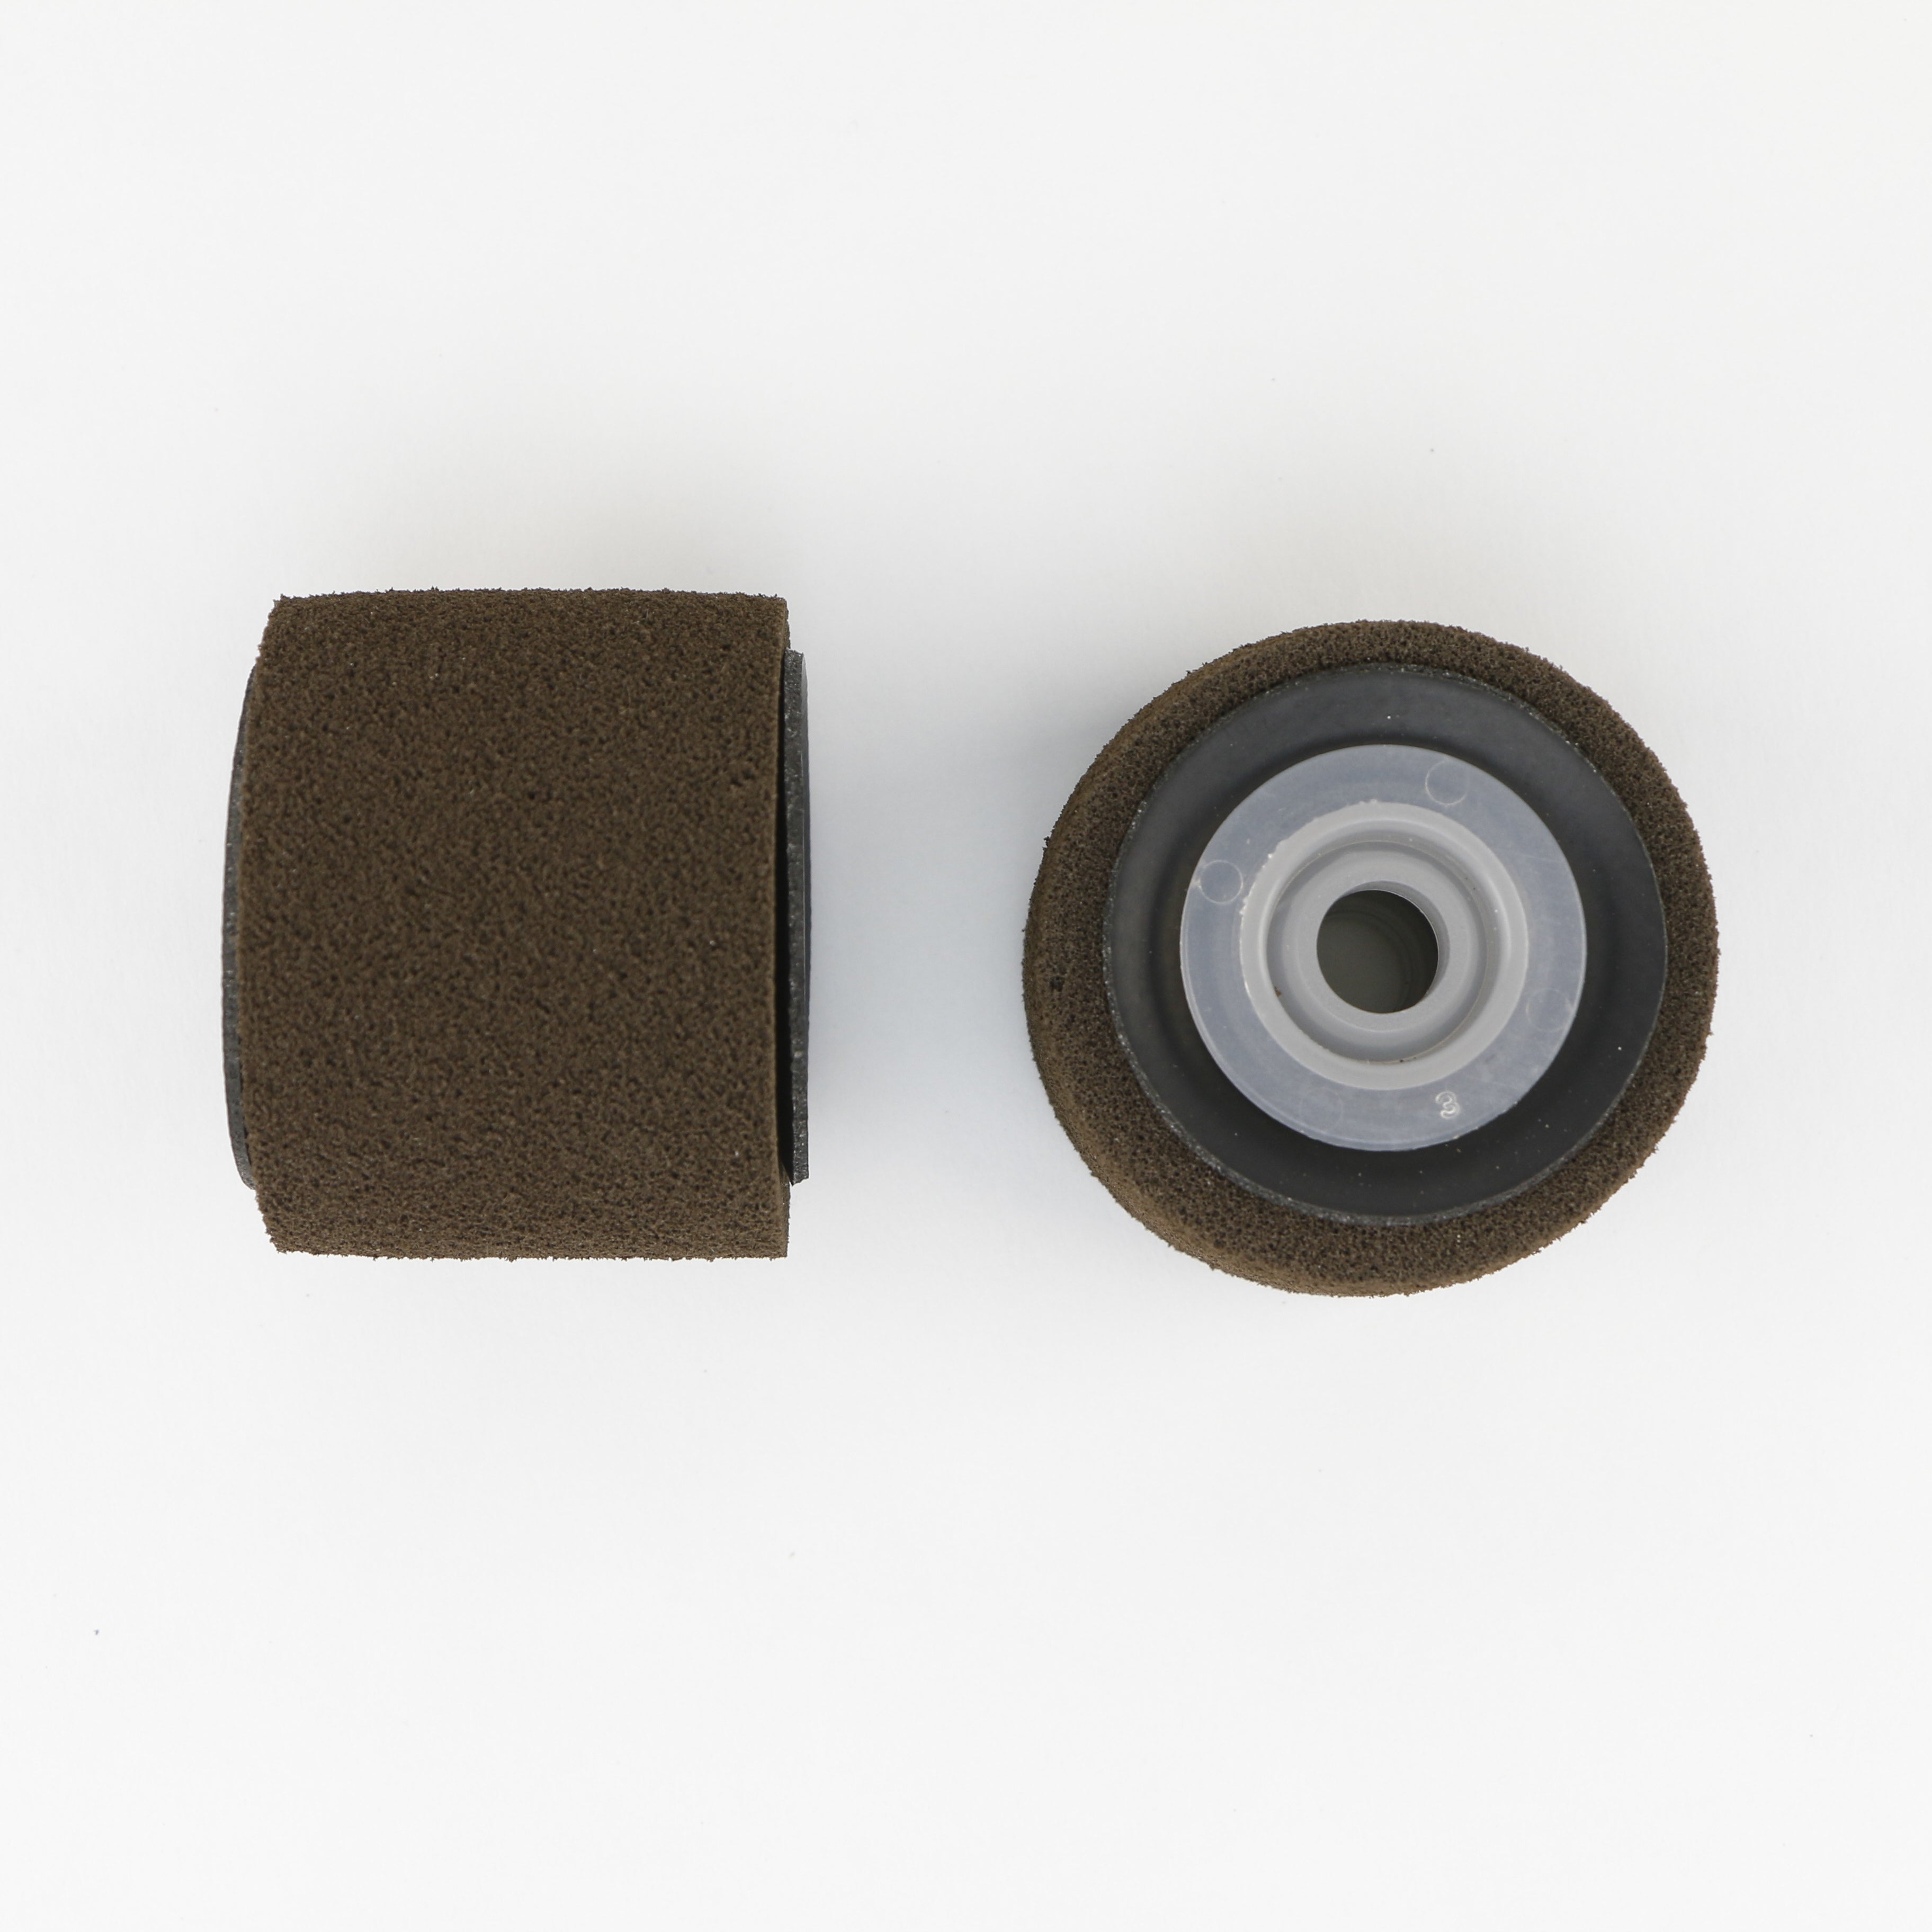 1.5 inch One shot replacement roller (2 Pack)